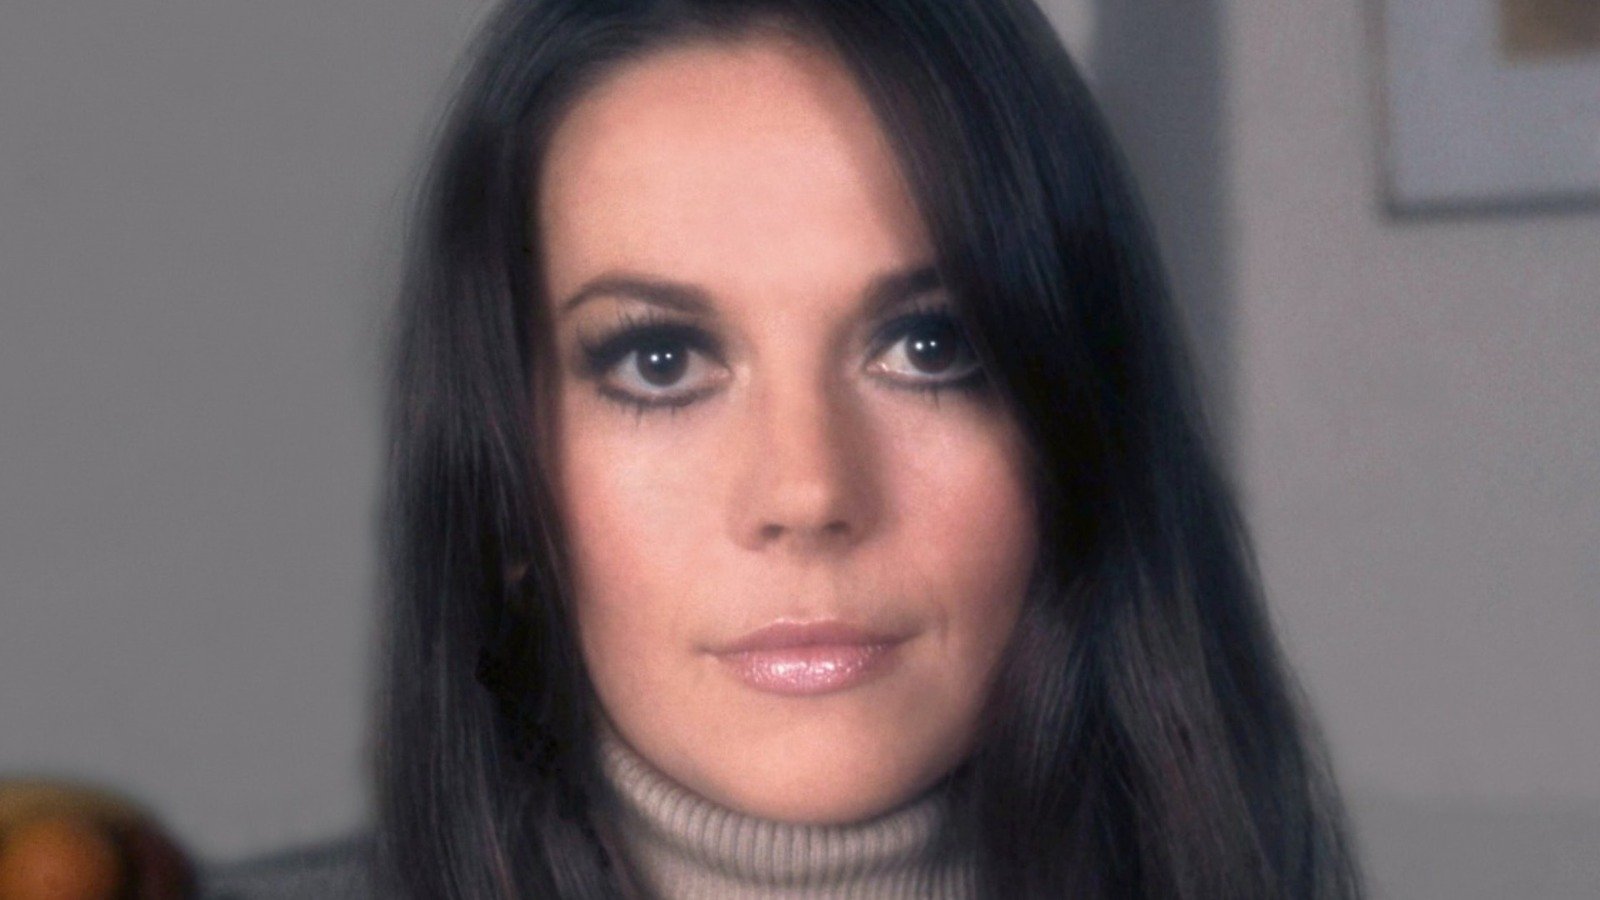 Heartbreaking Details About Natalie Wood's Life